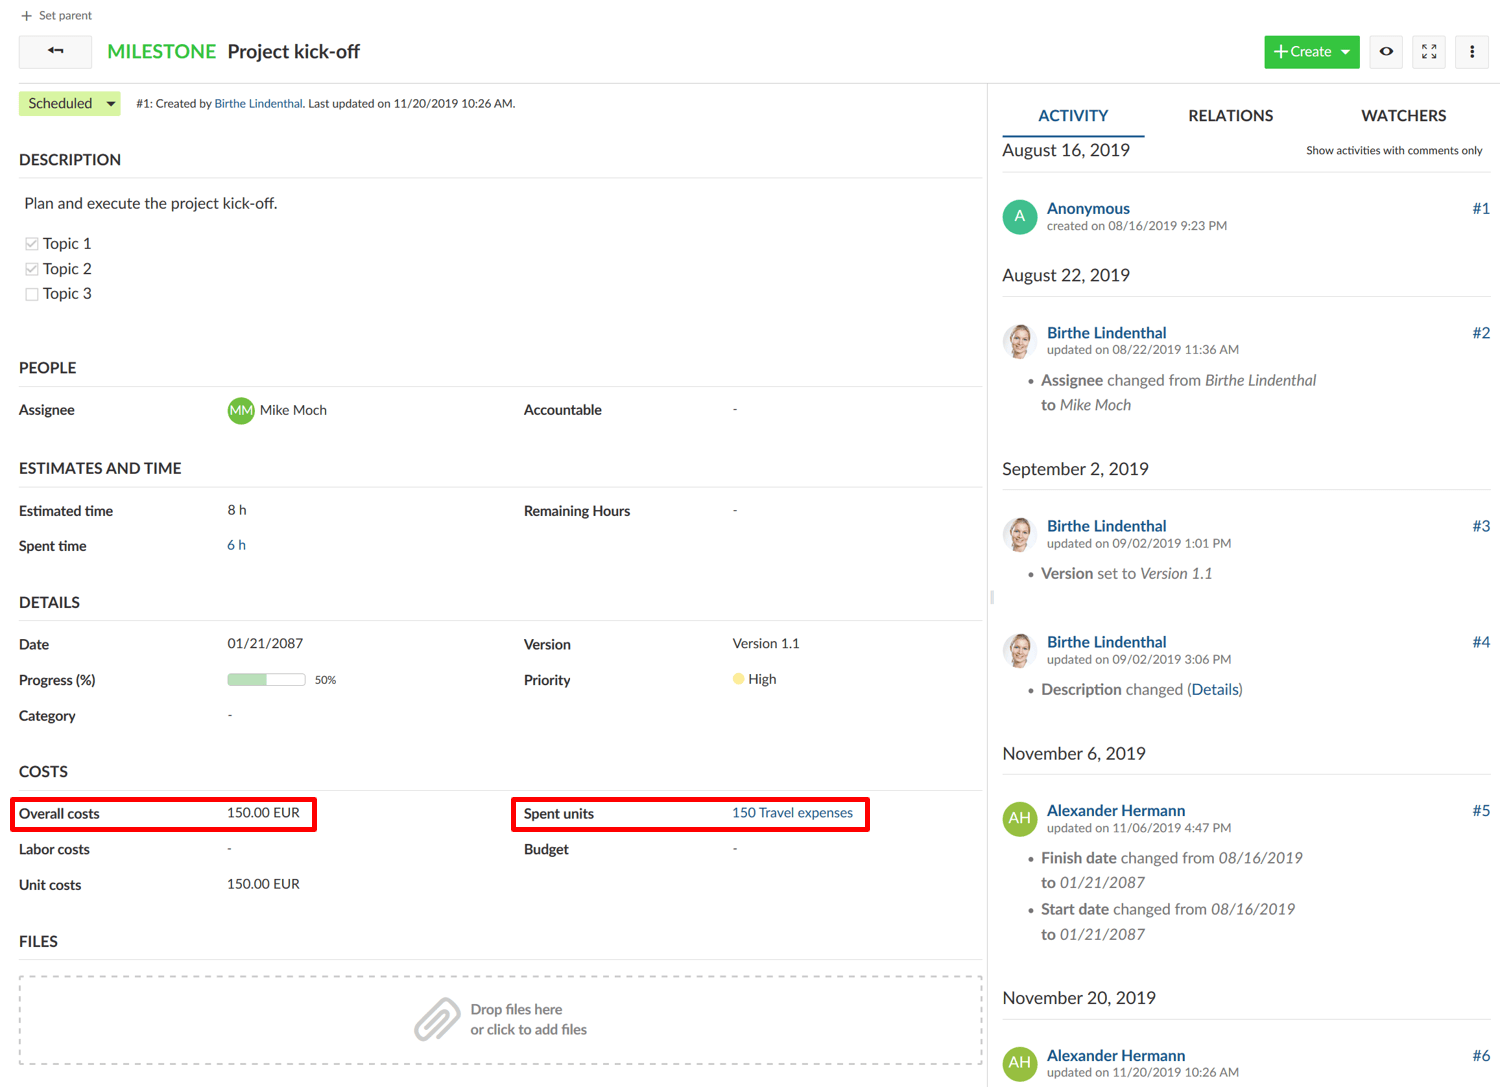 Cost tracking overview